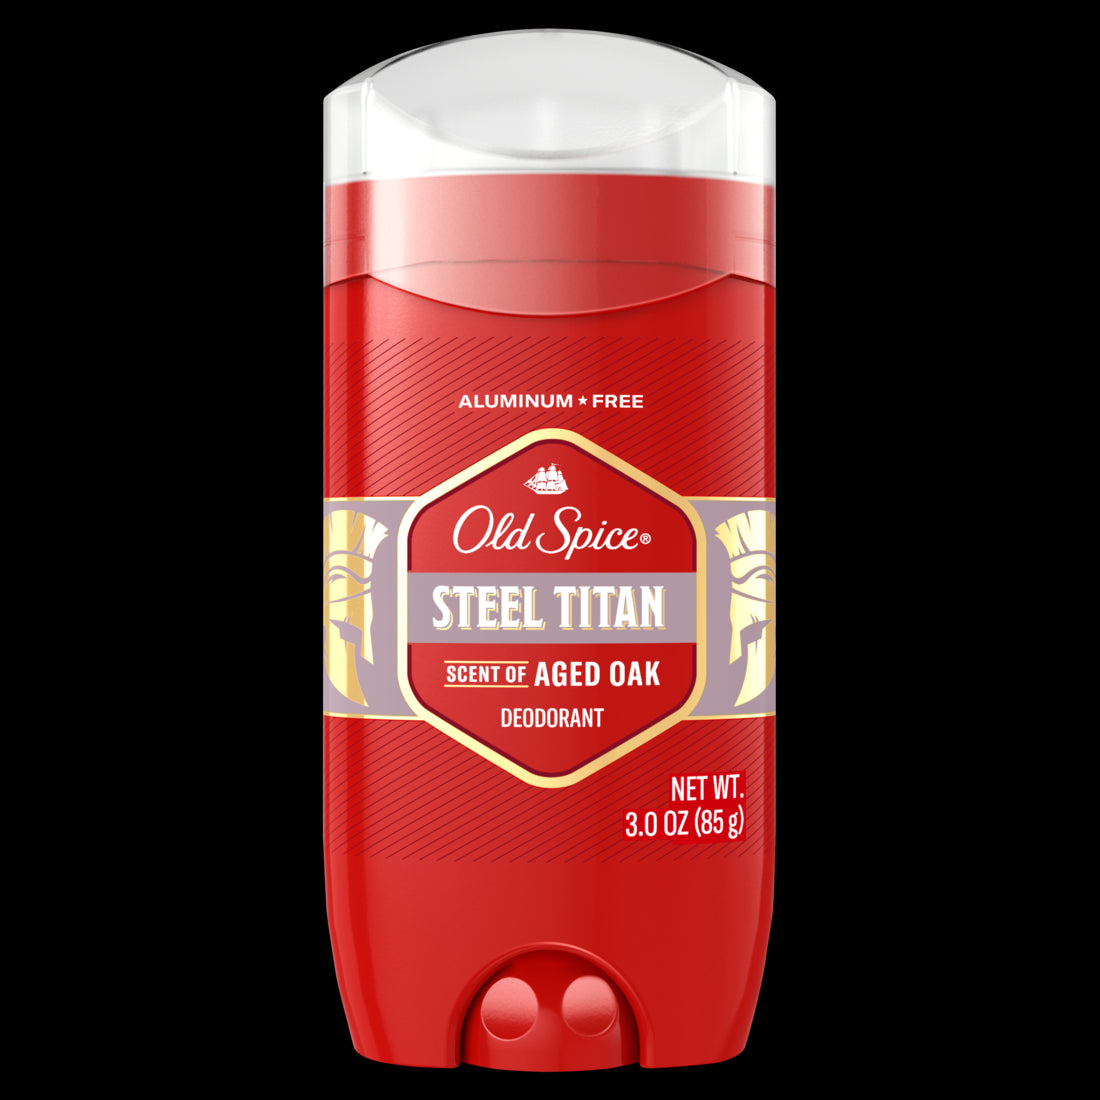 Old Spice Red Collection Deodorant For Men Aluminum Free Steel Titan Scent - 3oz/12pk